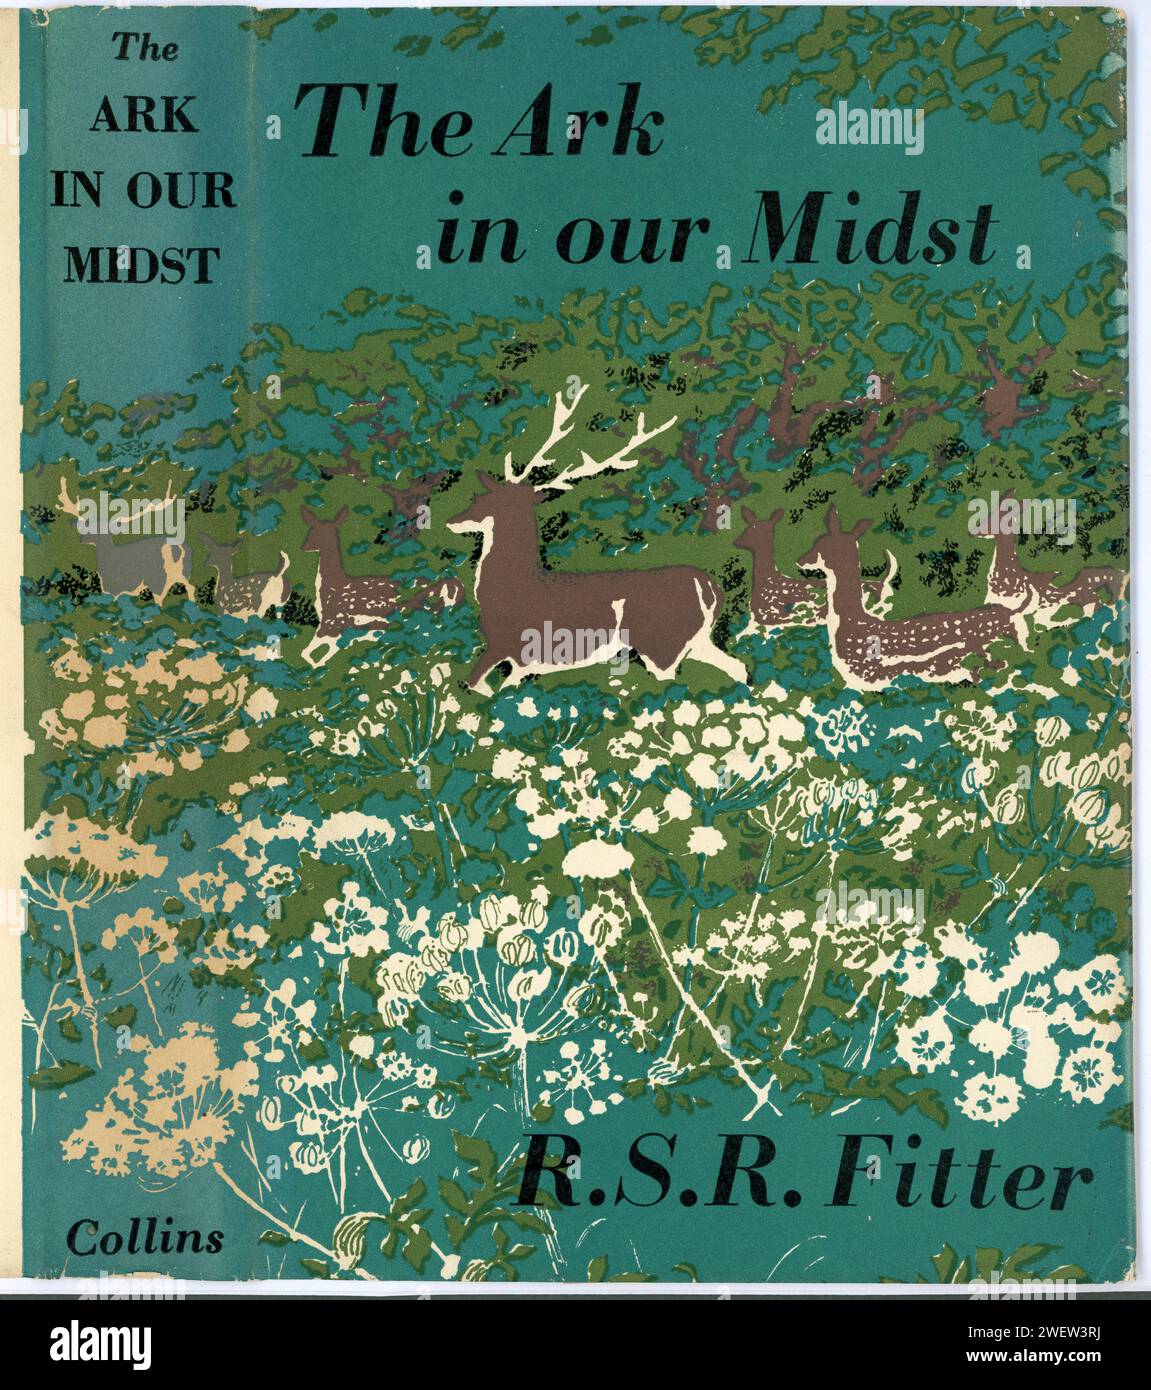 Original Retro-Buchcover - The Ark in Our Midst, „The Story of the eingeführte Animals of Britain: Birds, Beasts, Reptiles, Amphibians, Fishes“. R. S. R. FITTER 1959 Stockfoto